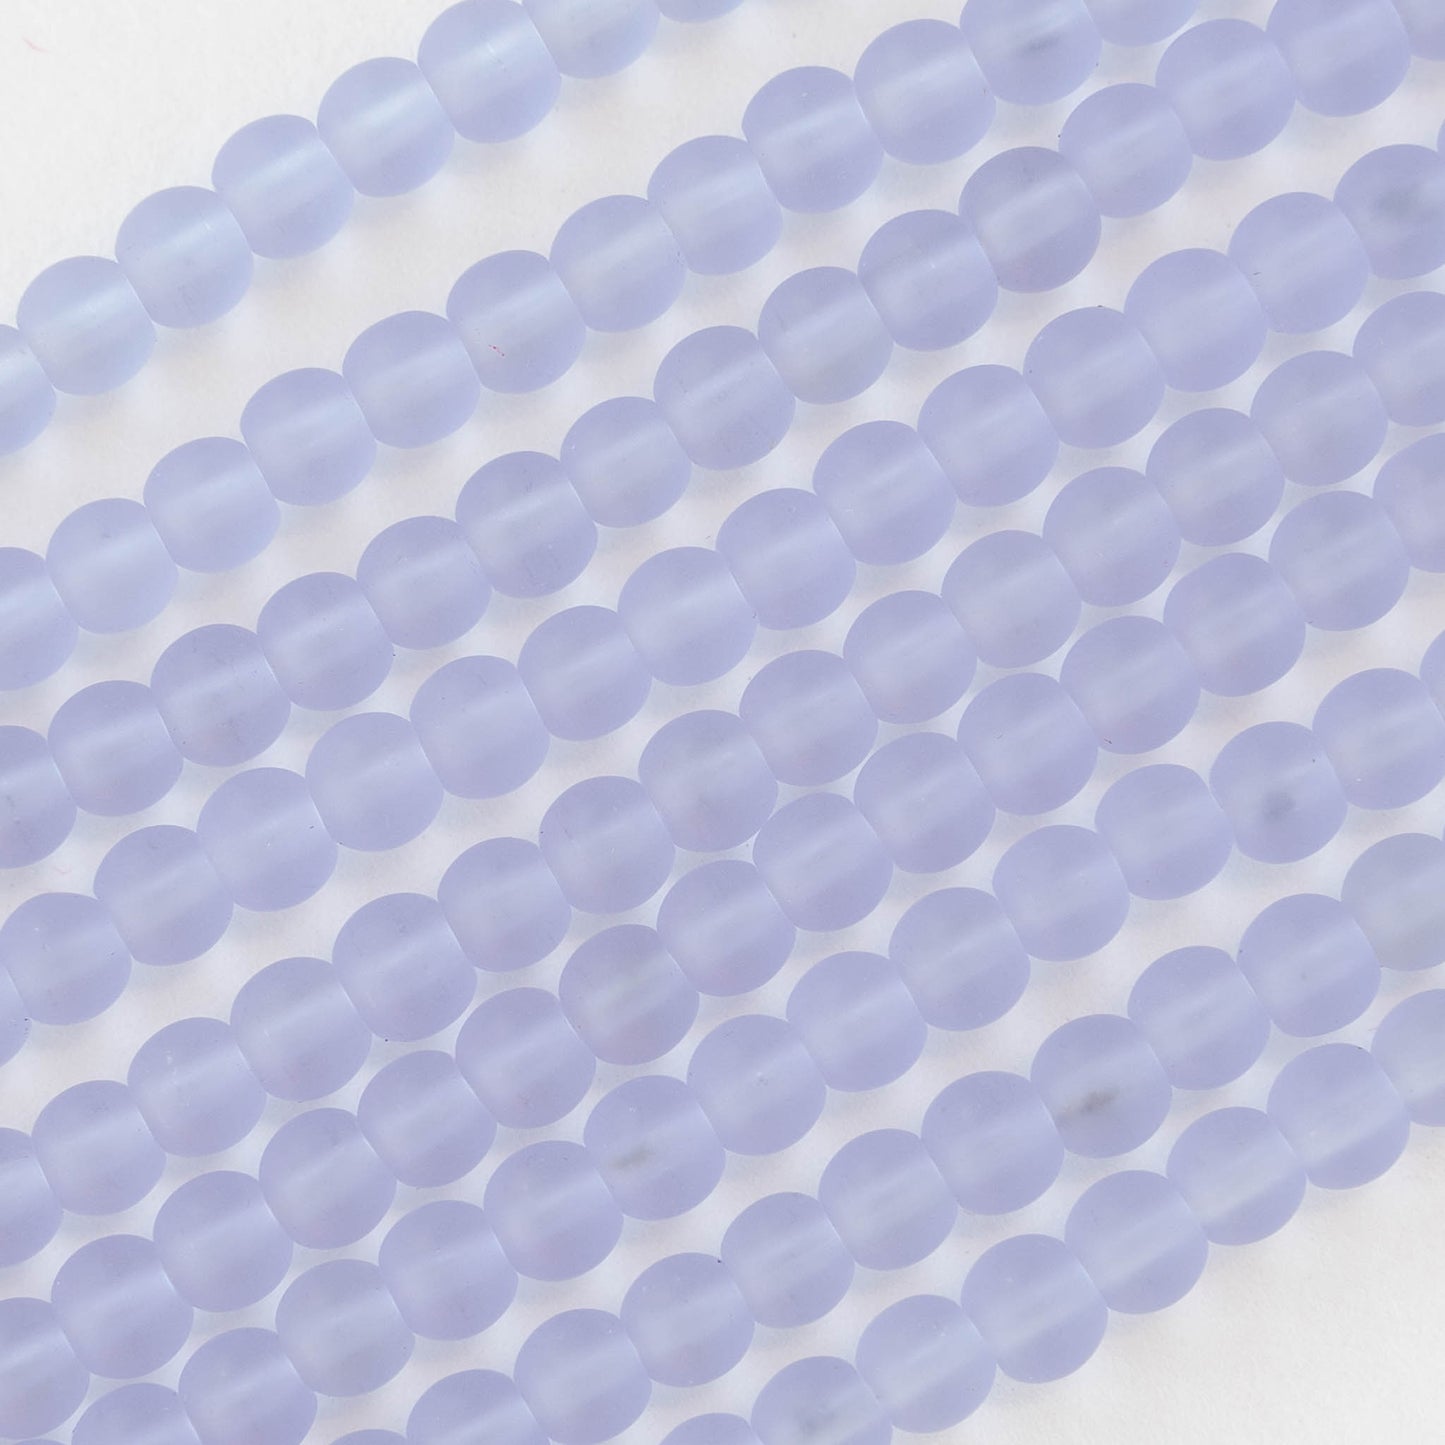 5mm Frosted Glass Rounds - Lavender - 16 Inches